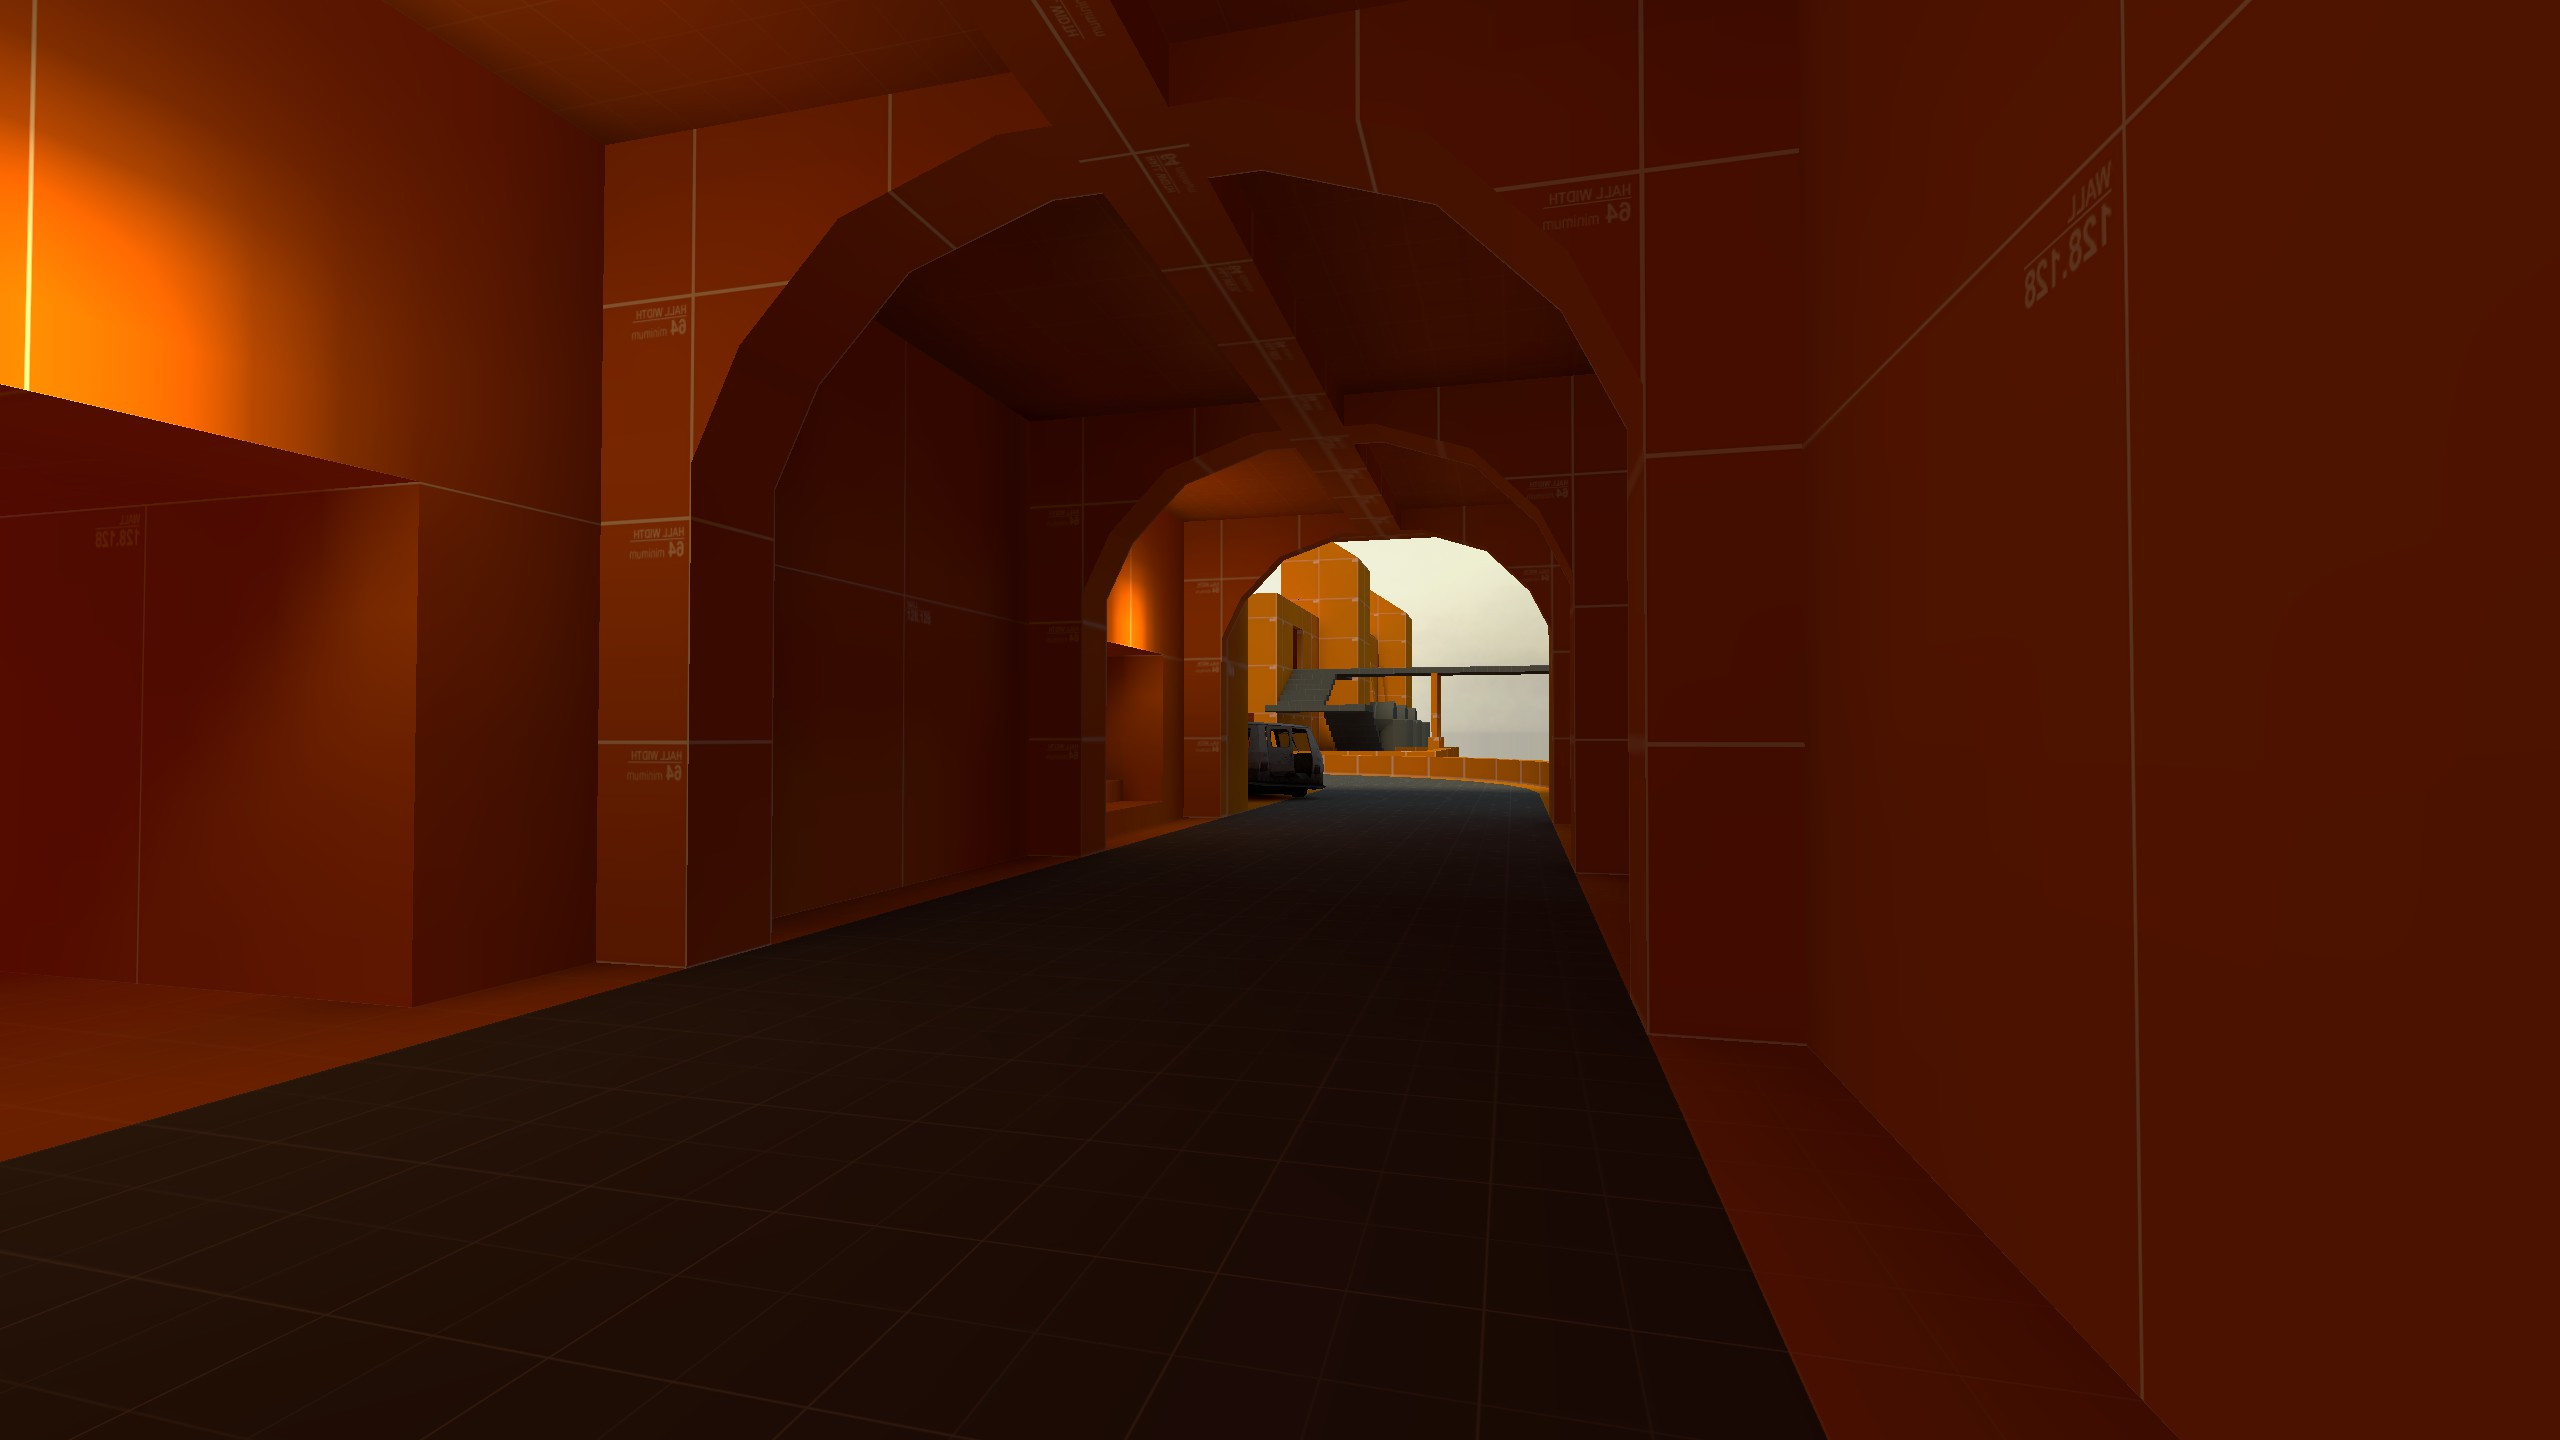 A blockout screenshot of the entrance tunnel headed towards the central exterior section.